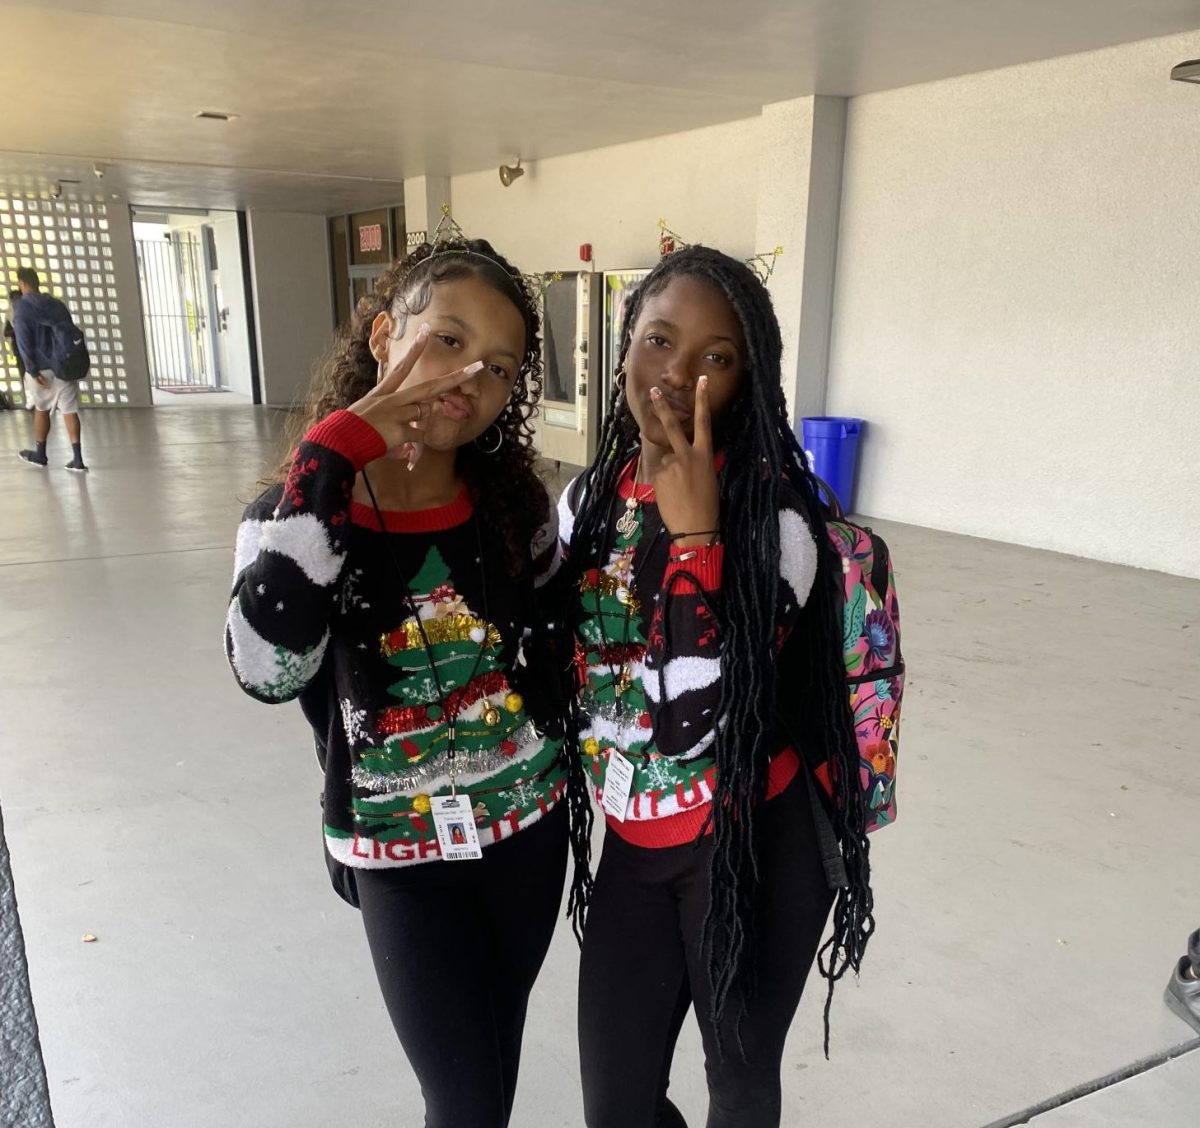 Two girls decked out in holiday gear!